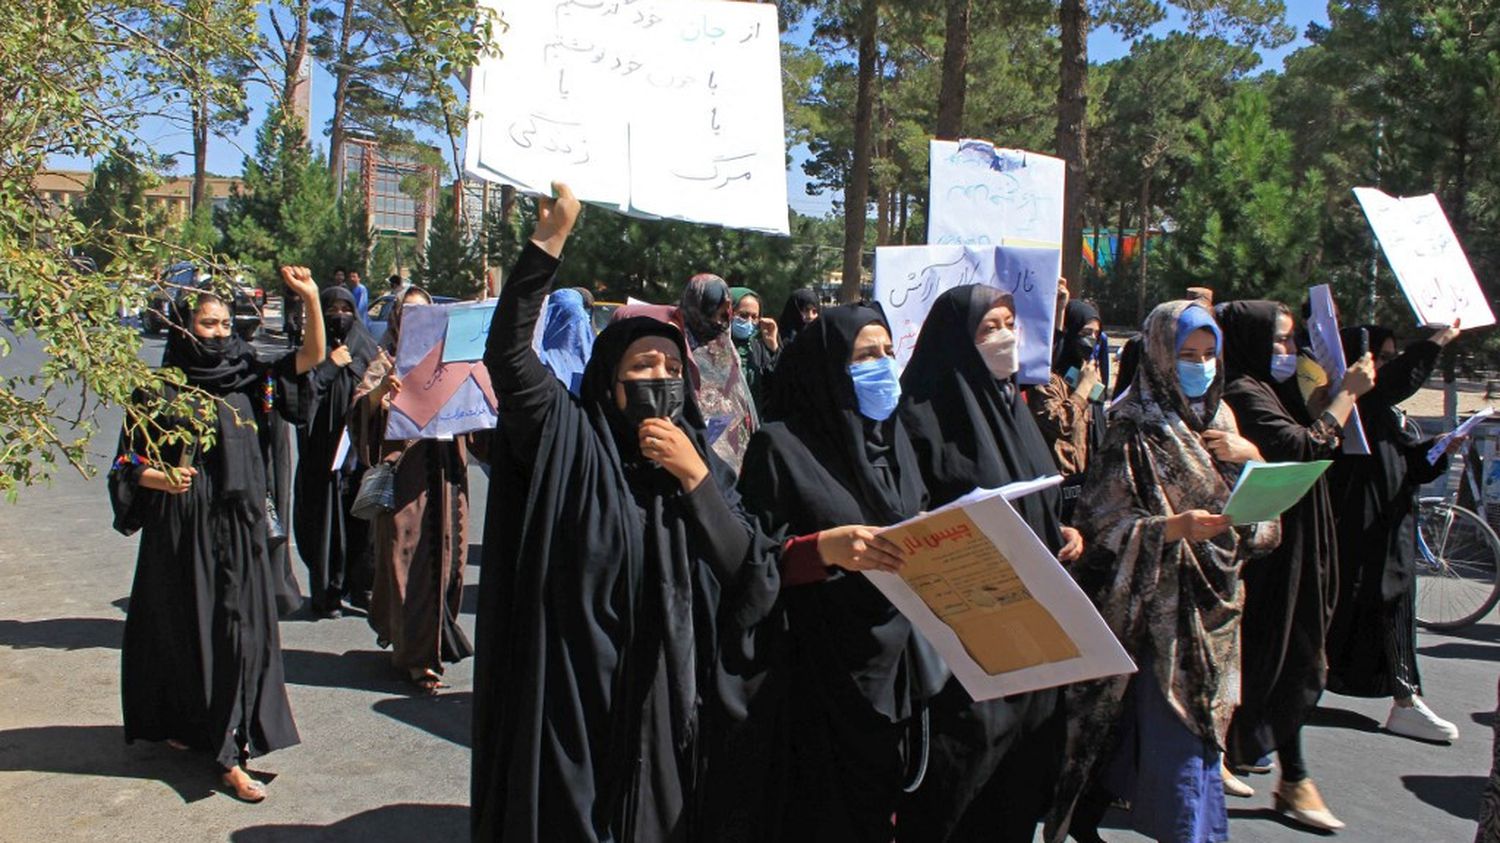 In Herat, Afghan women protested for their rights

